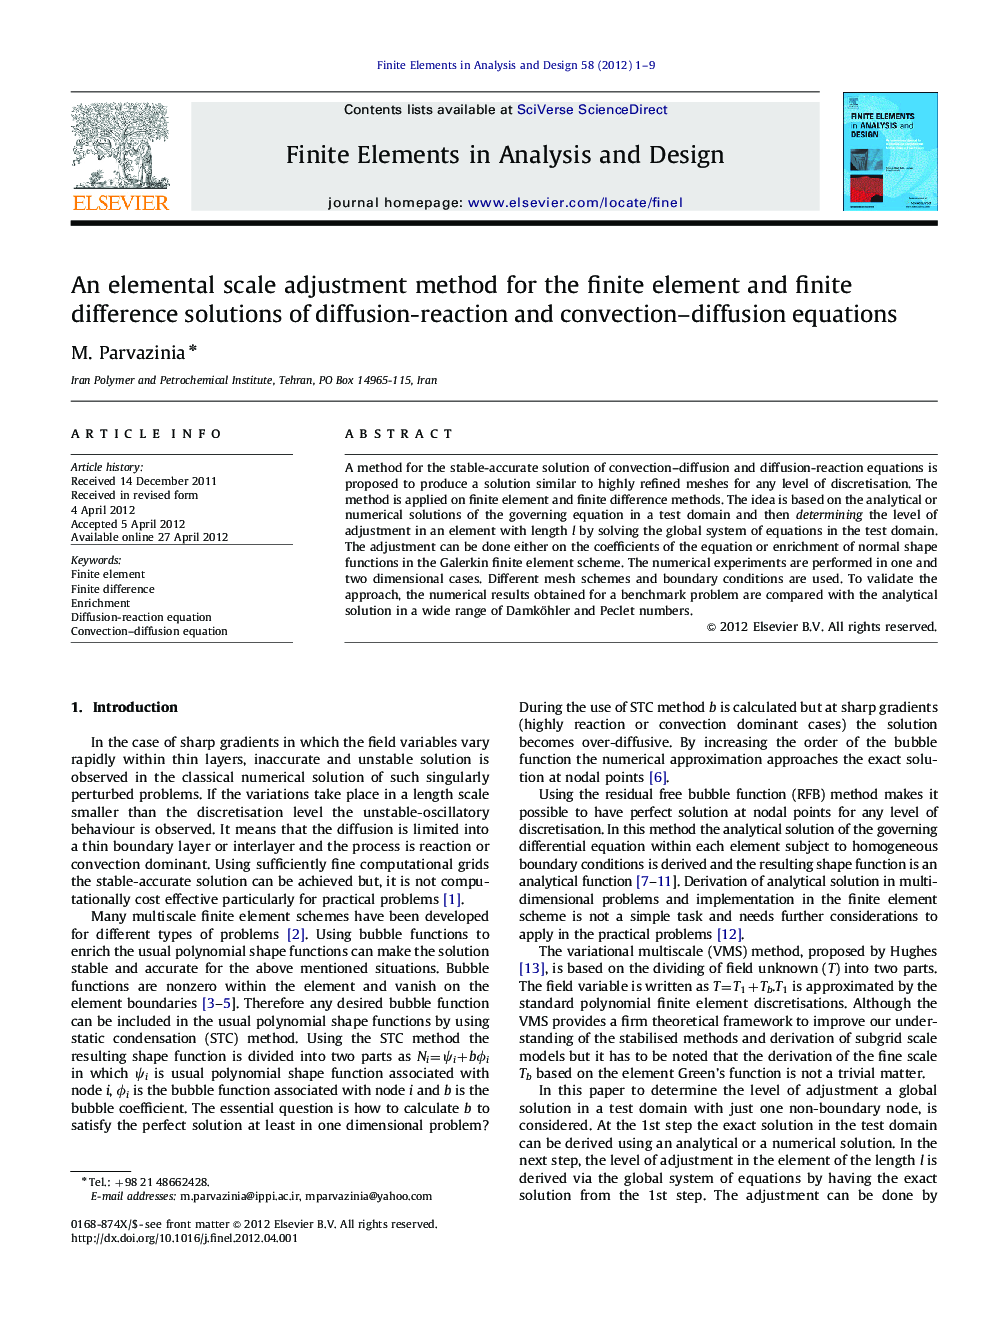 An elemental scale adjustment method for the finite element and finite difference solutions of diffusion-reaction and convection–diffusion equations